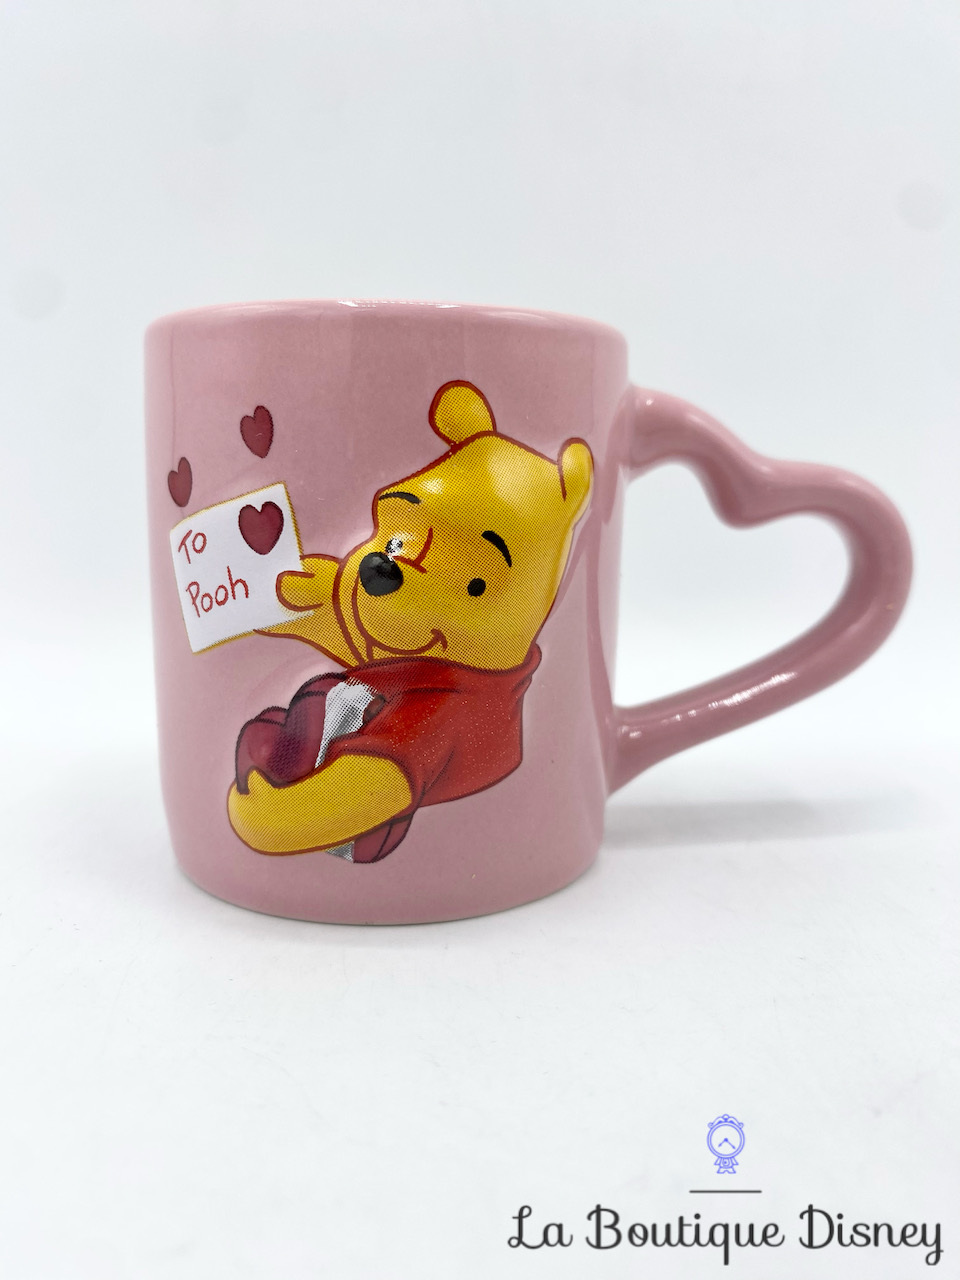 Tasse Expresso Winnie l\'ourson To Pooh Disney Store Exclusive mug coeur love amour